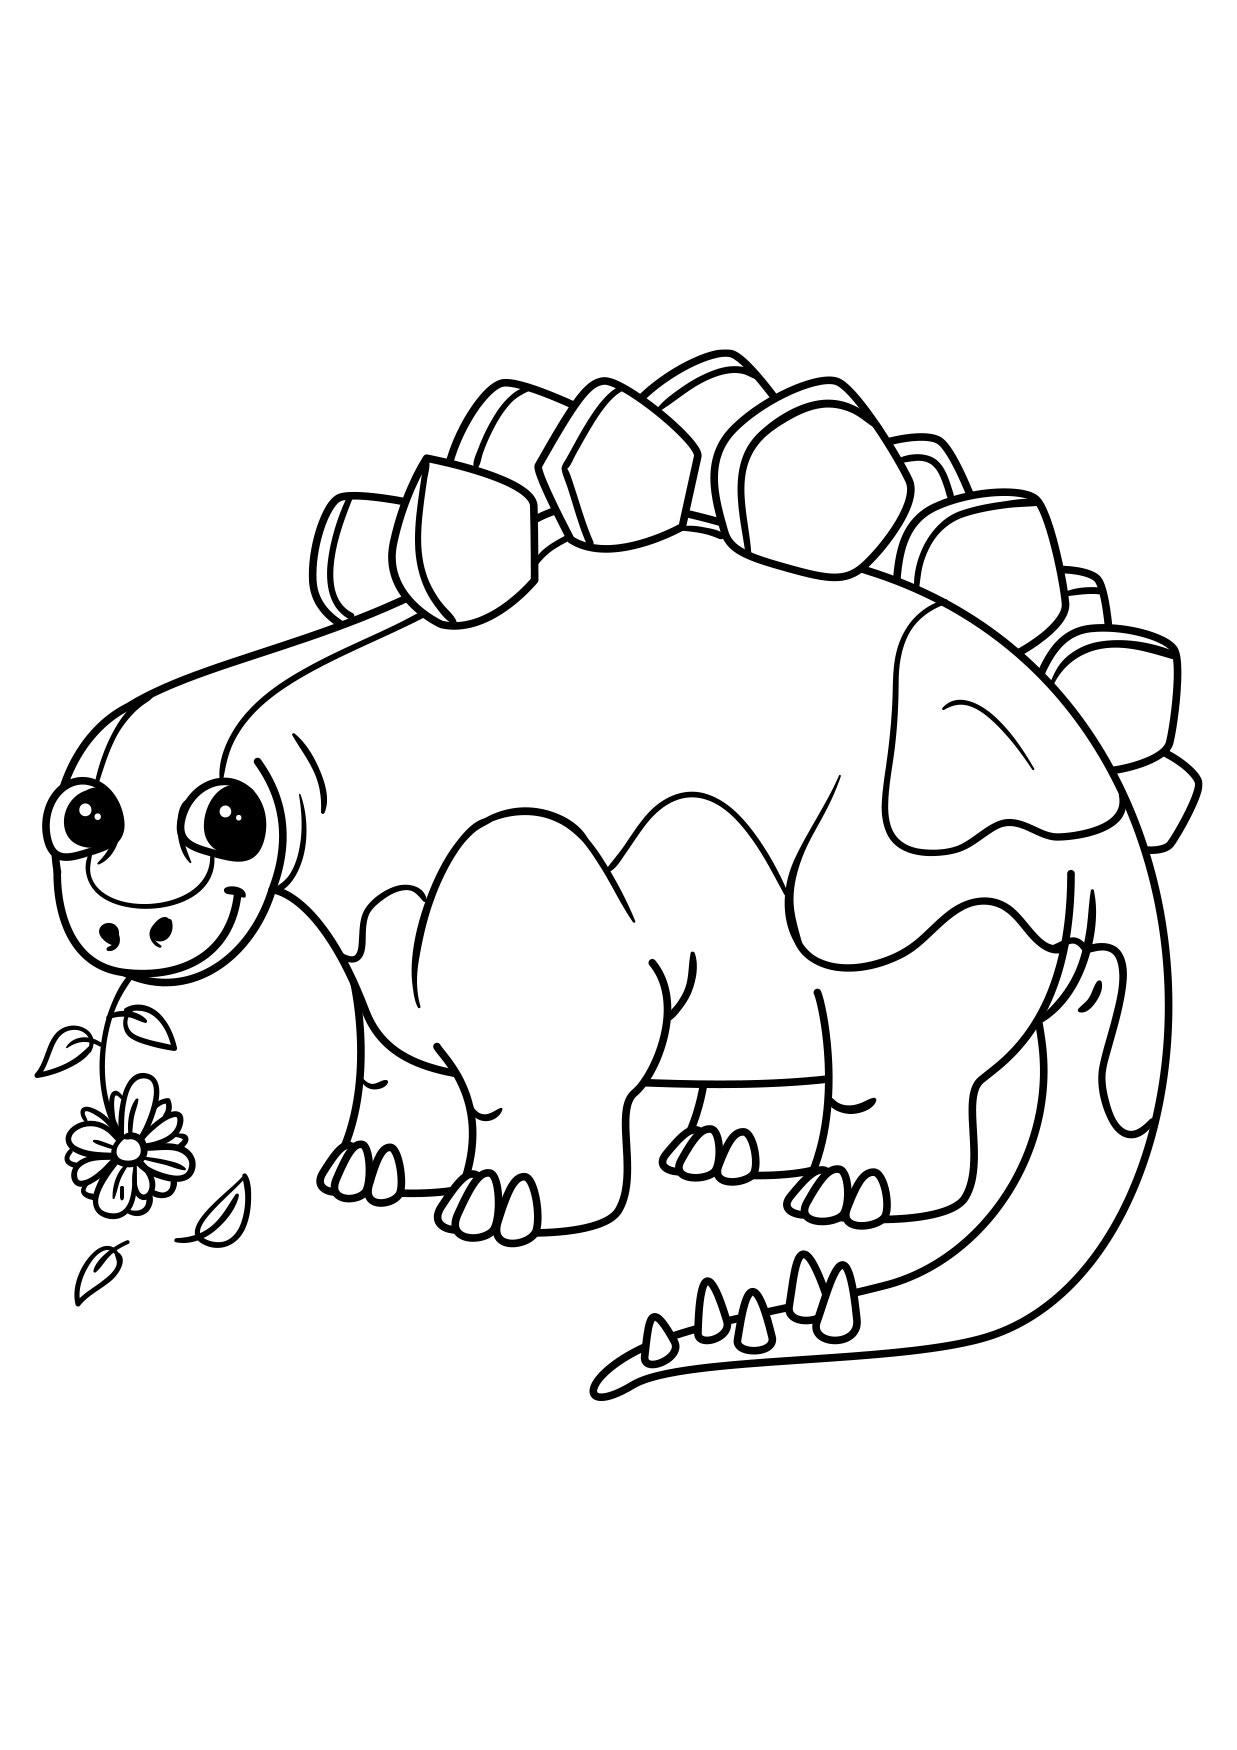 Coloring page stegosaurus with flower